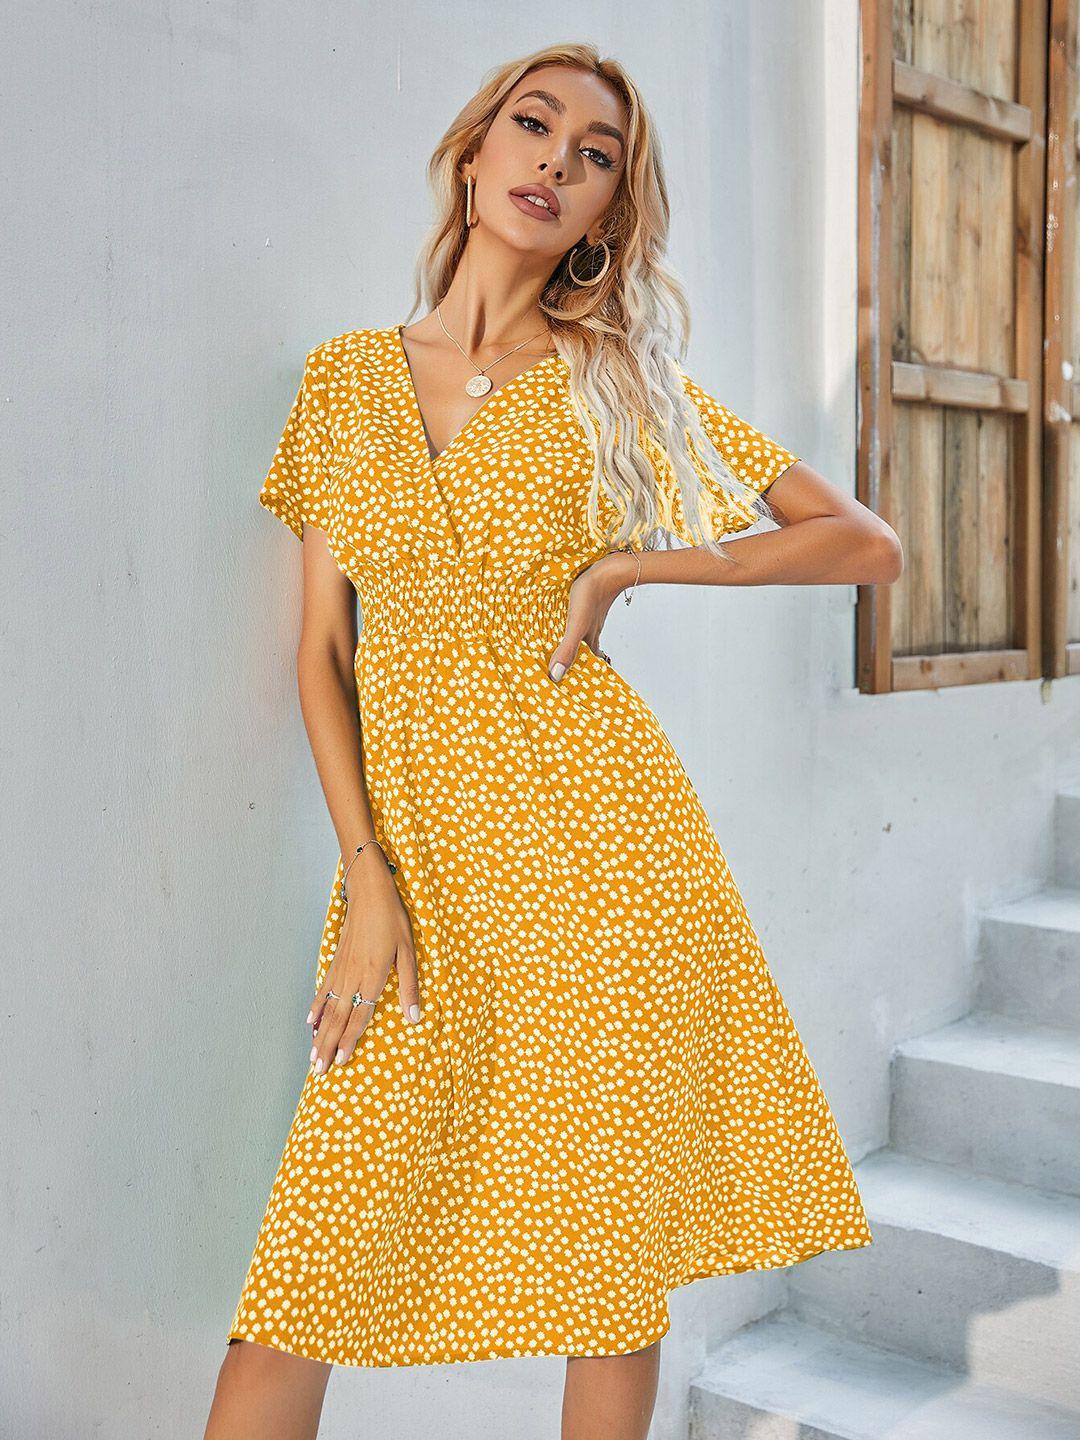 stylecast yellow floral dress